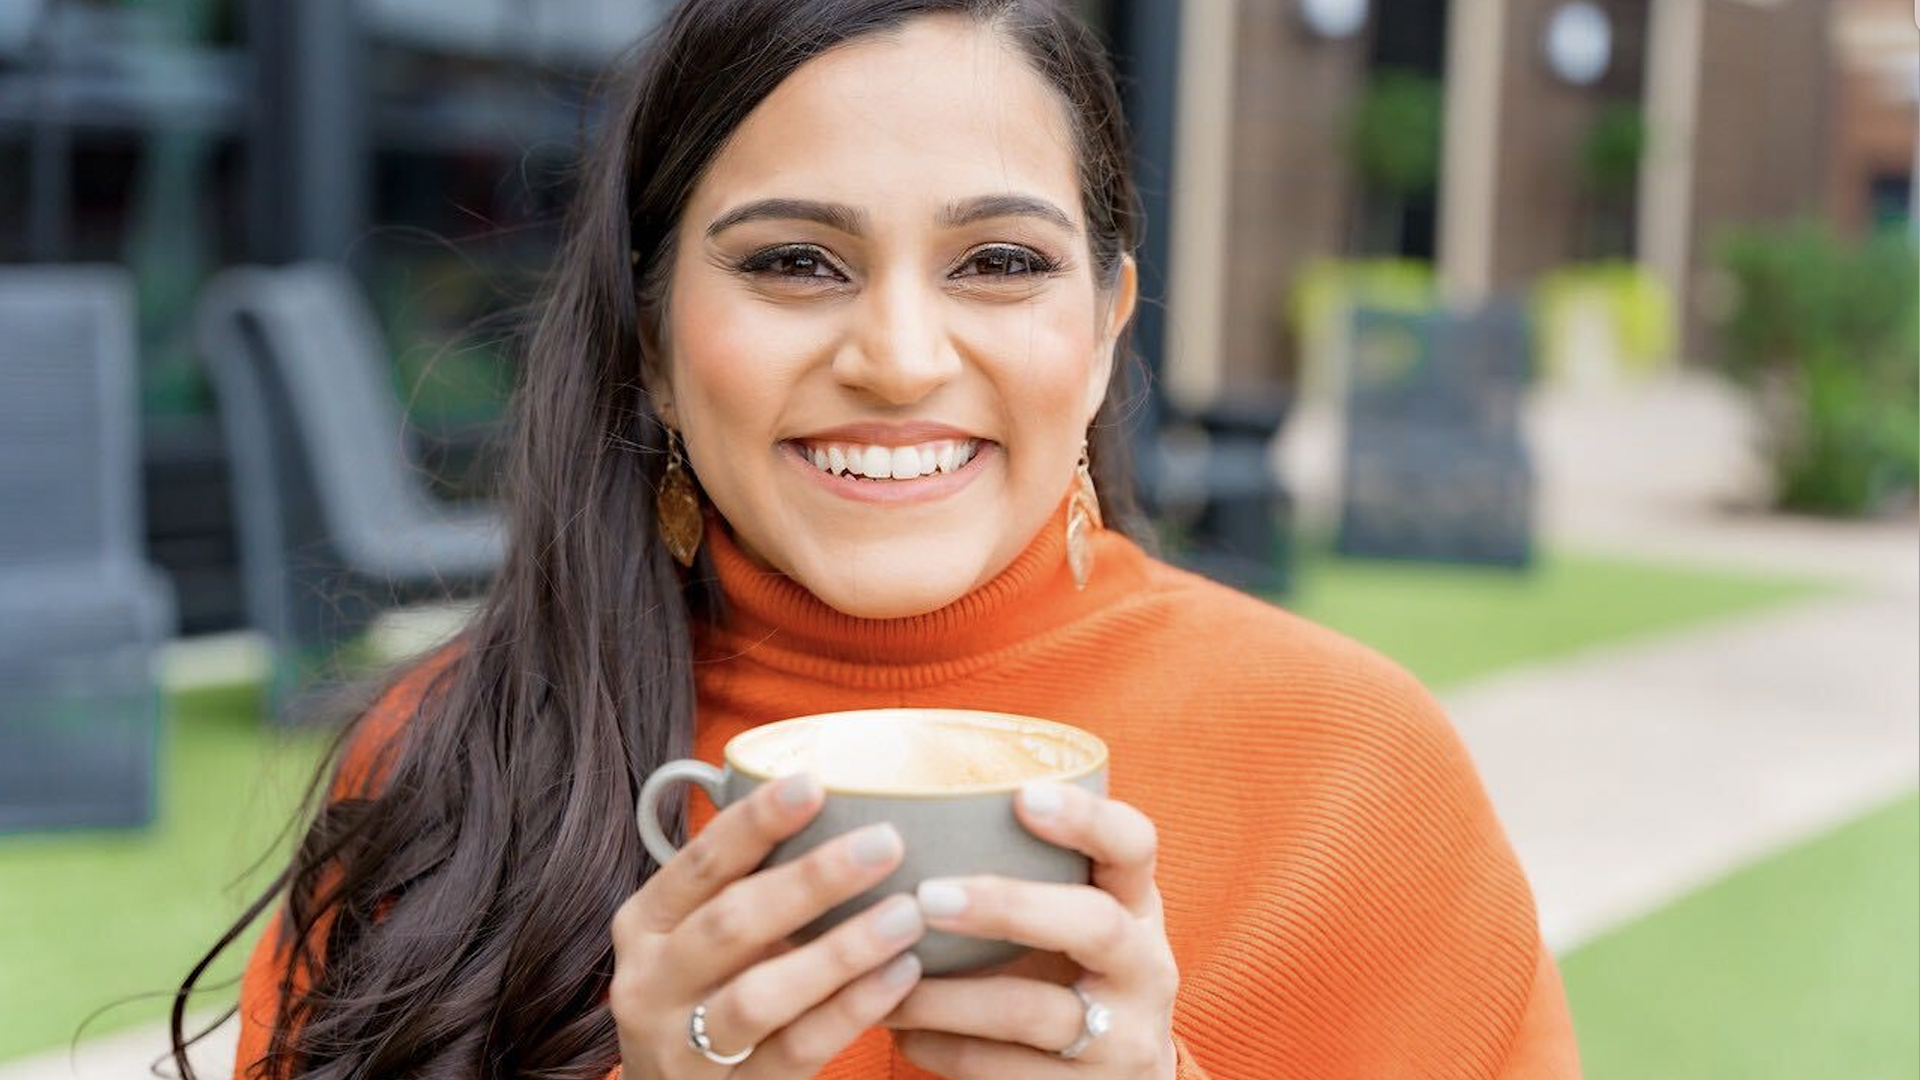 A woman wearing an orange sweater, drinking a cup of coffee